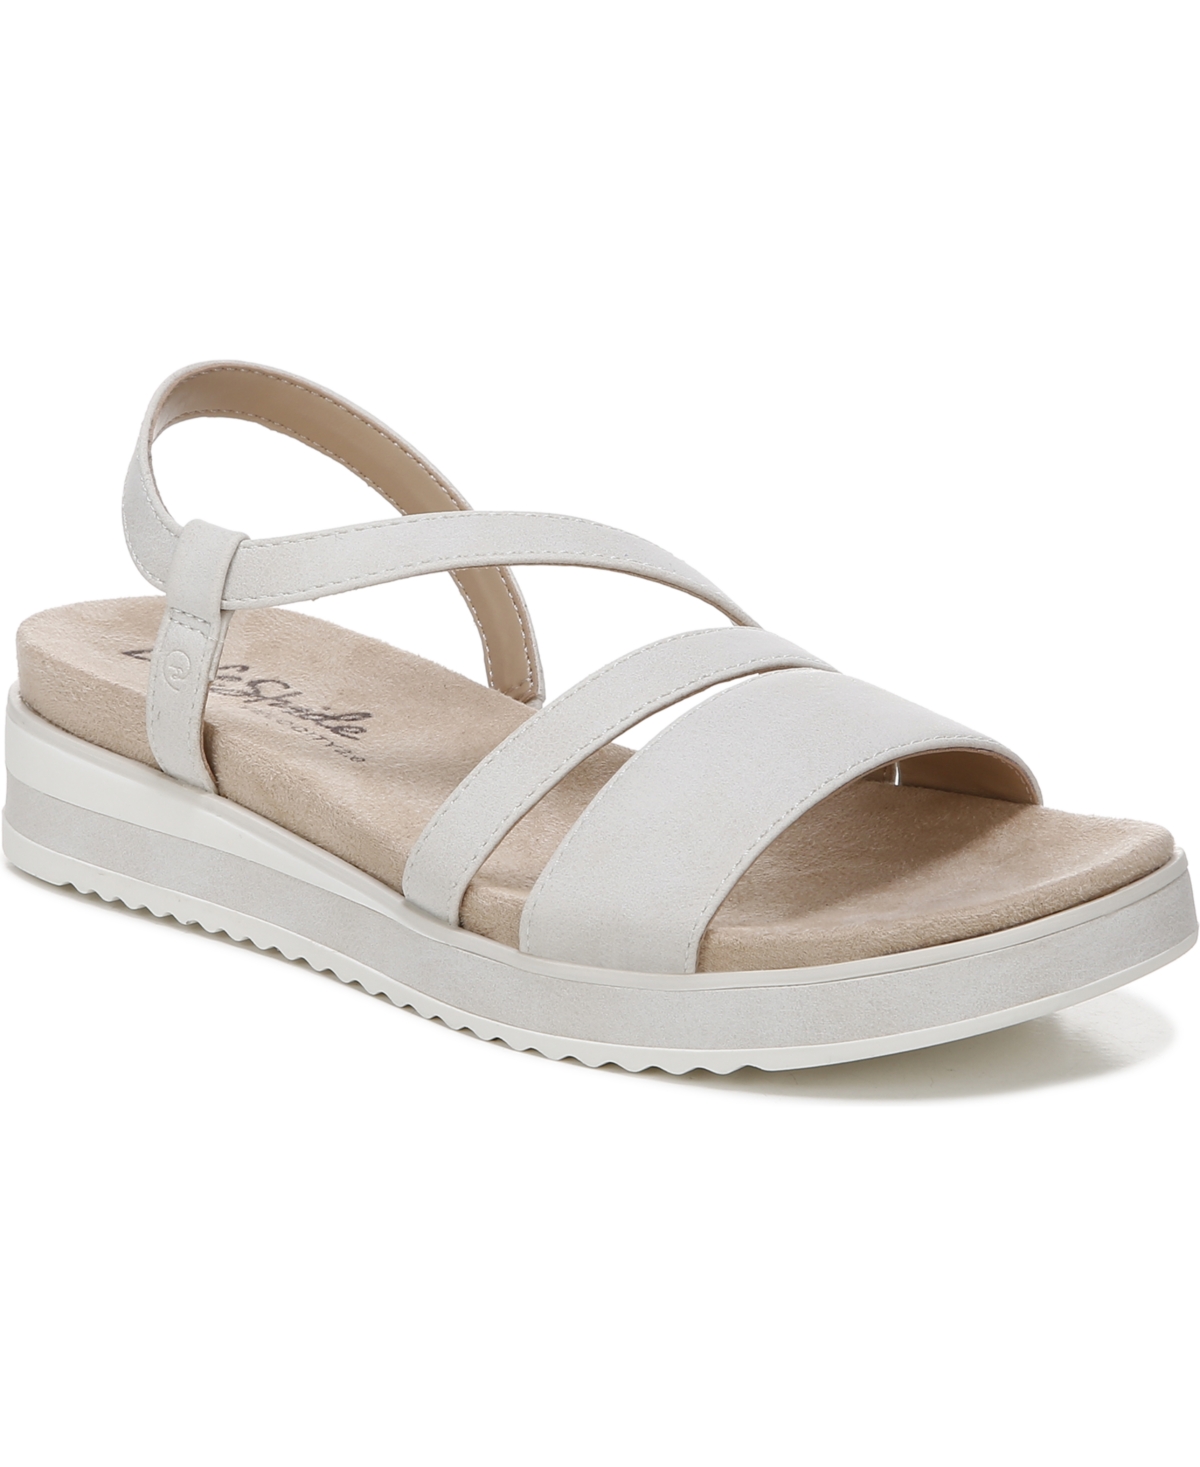 Lifestride Zoe Strappy Sandals Women's Shoes In Bone Faux Leather ...